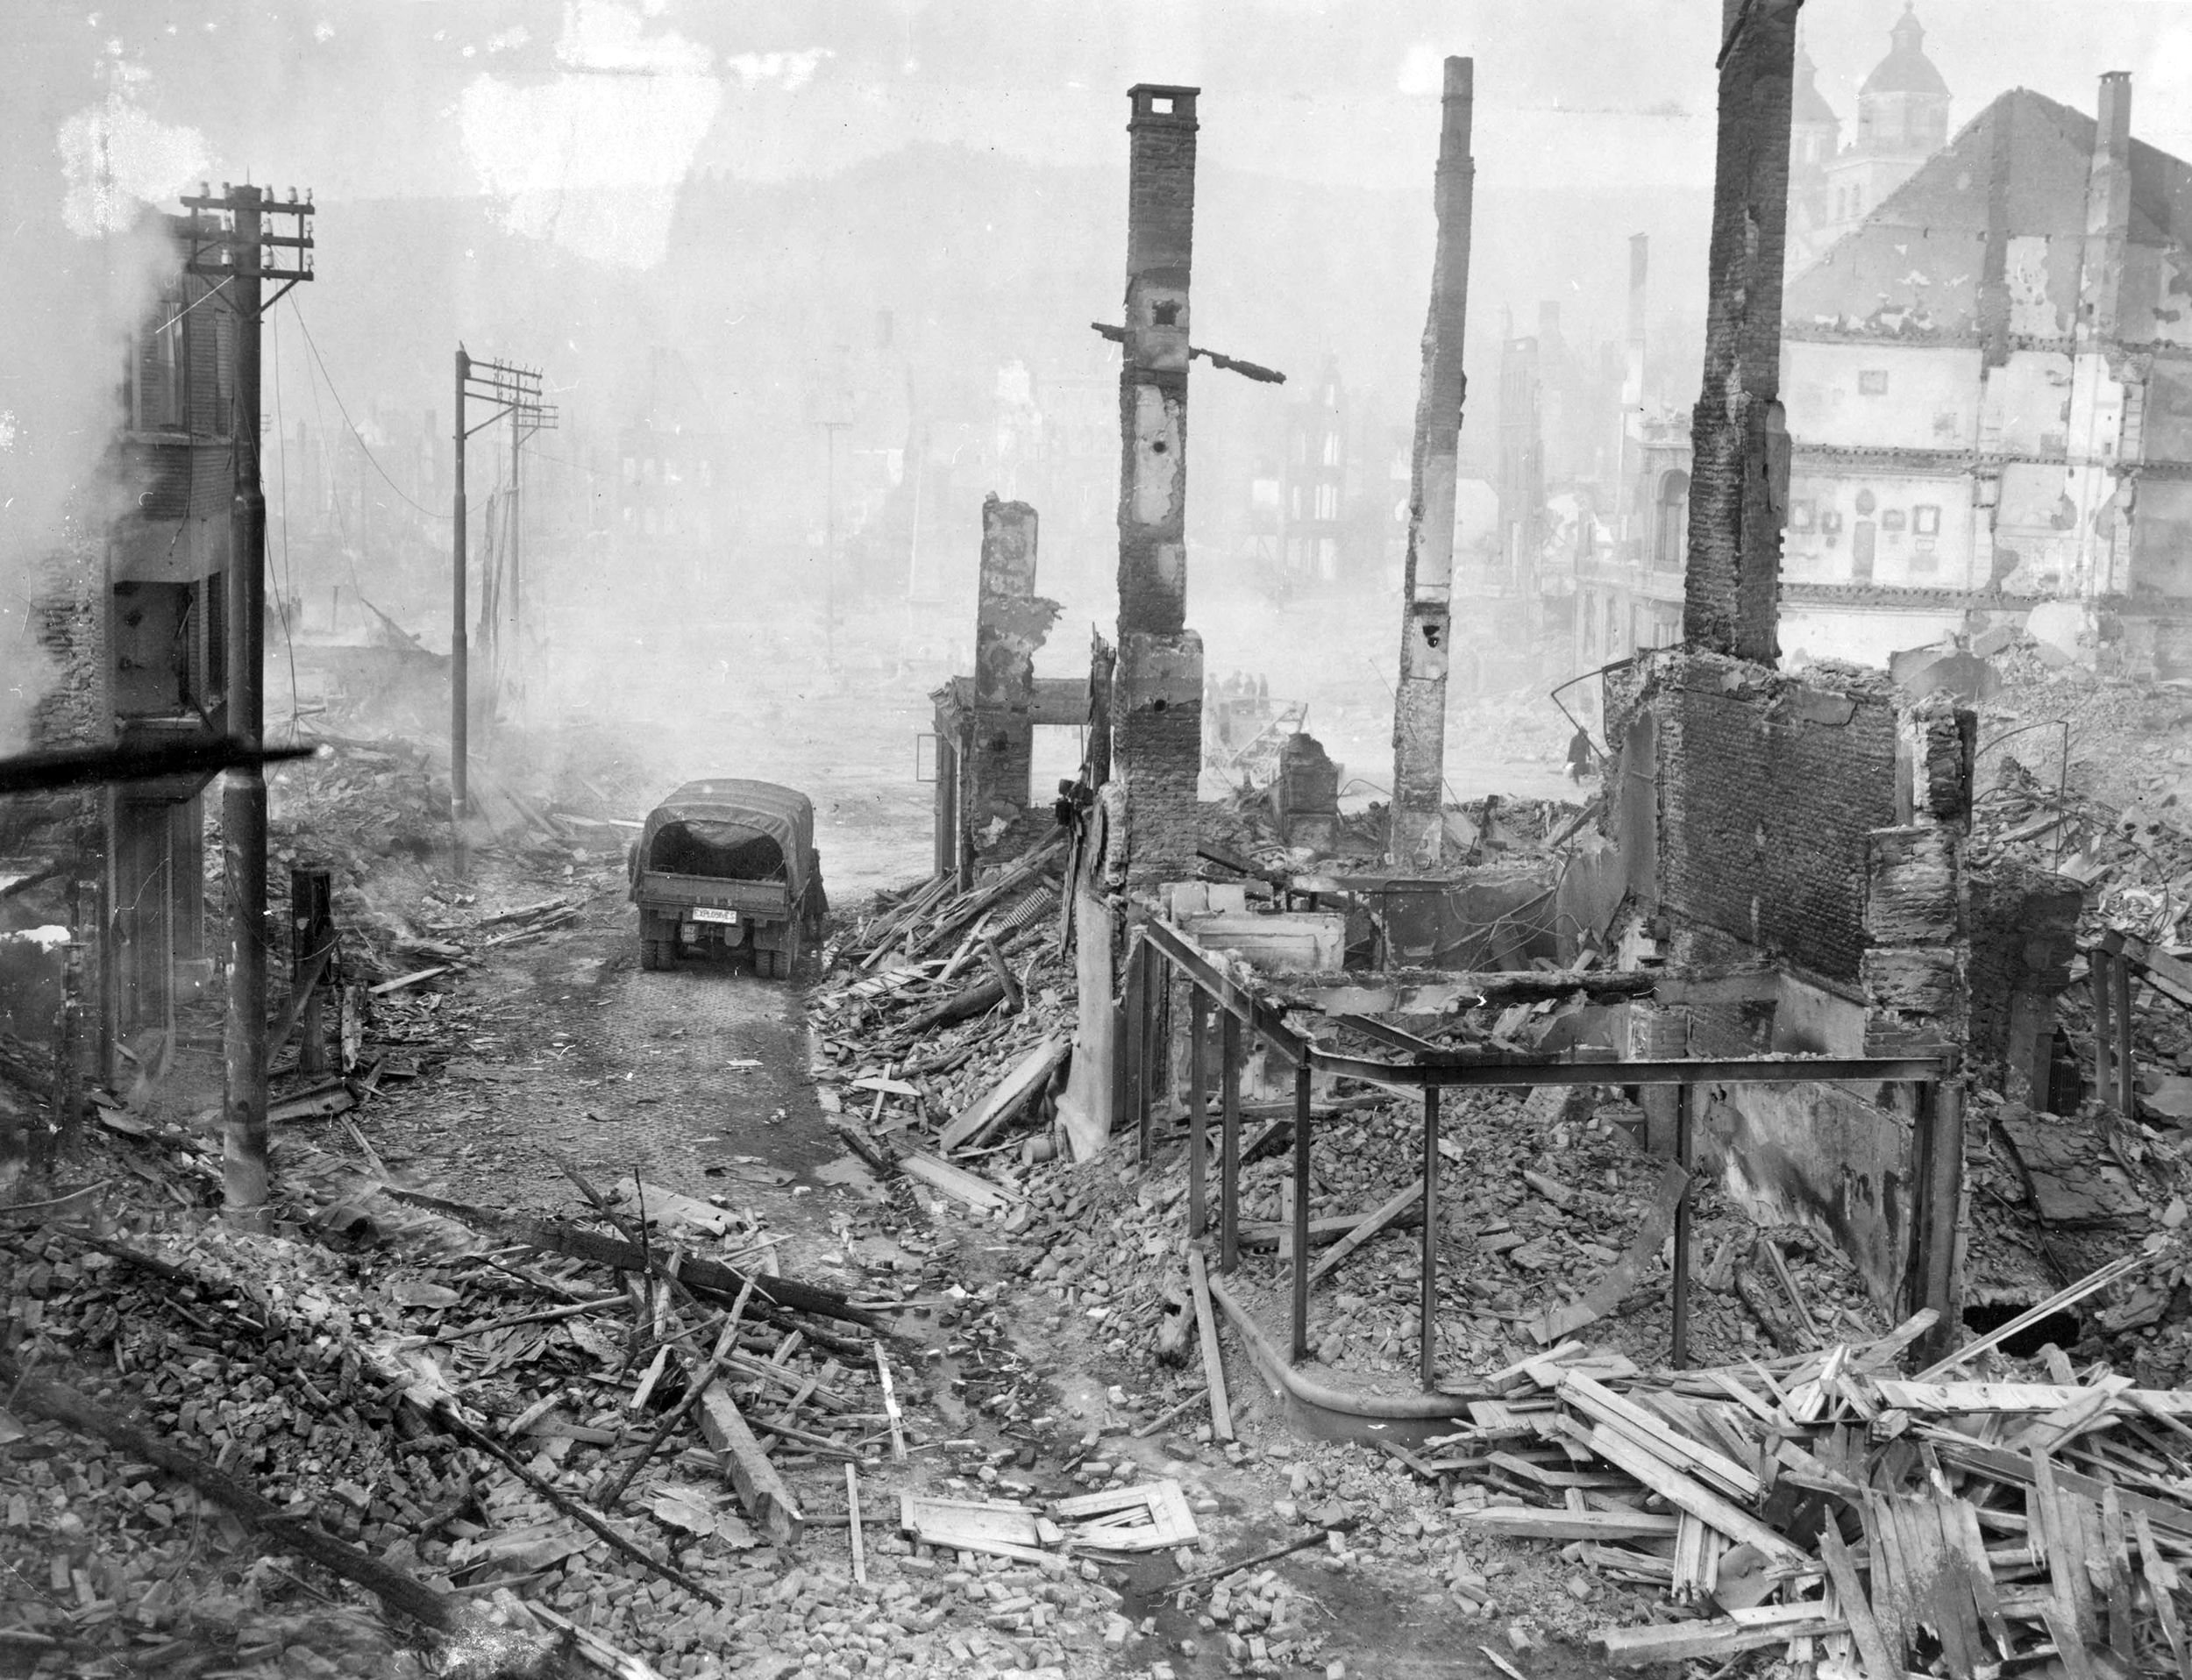 Malmédy was mistakenly bombed on three consecutive days, Dec. 23-25, 1944, by U.S. Army Air Force planes targeting other towns in the region. The death toll from the bombings topped 200 and included U.S. soldiers. Many more were wounded. 